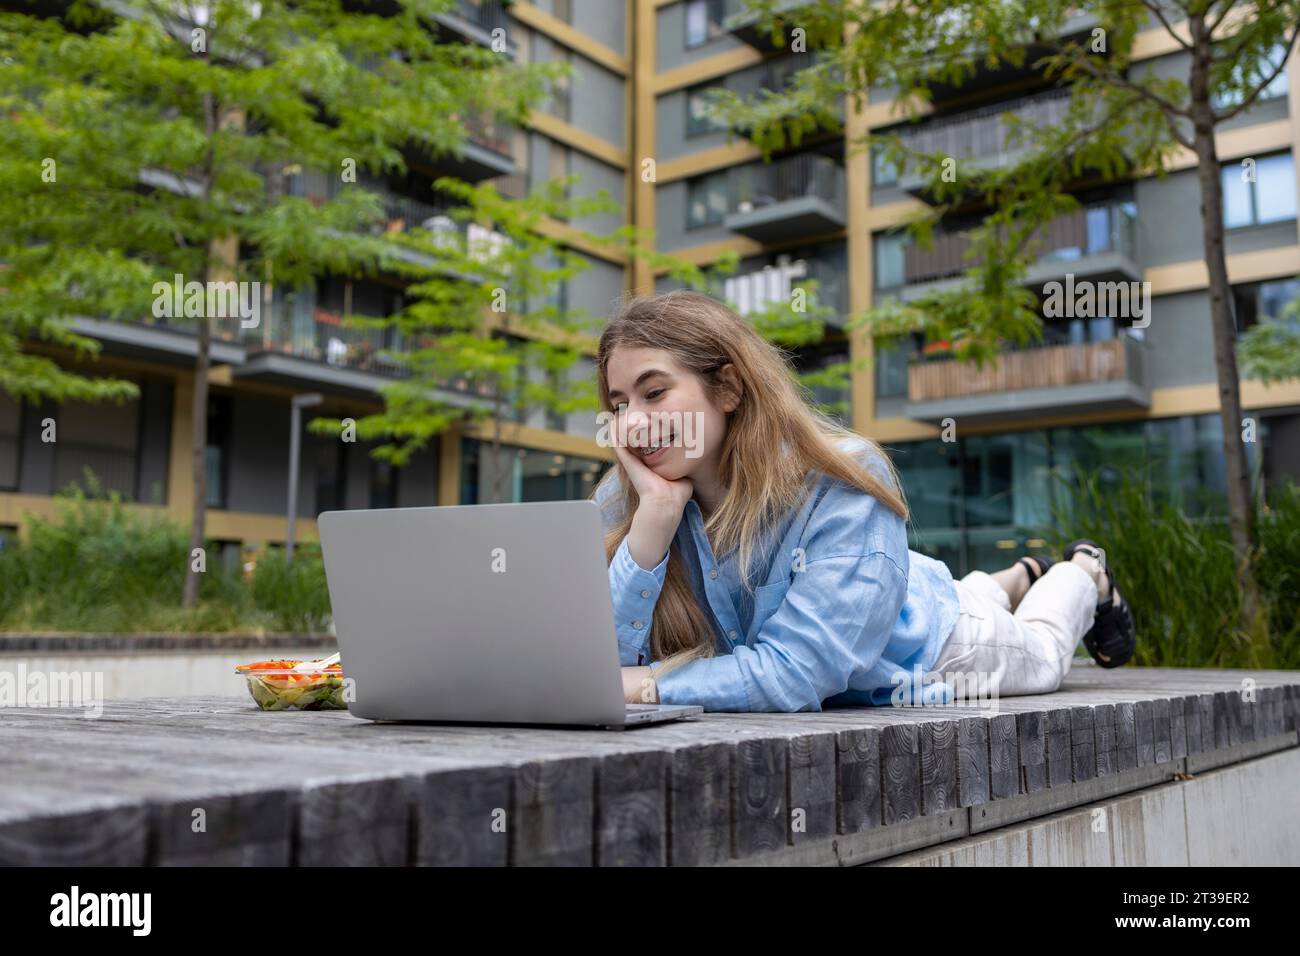 Happy blond haired student woman with braces lying in wooden bench and looking at laptop in lunchtime outdoors. Stock Photo